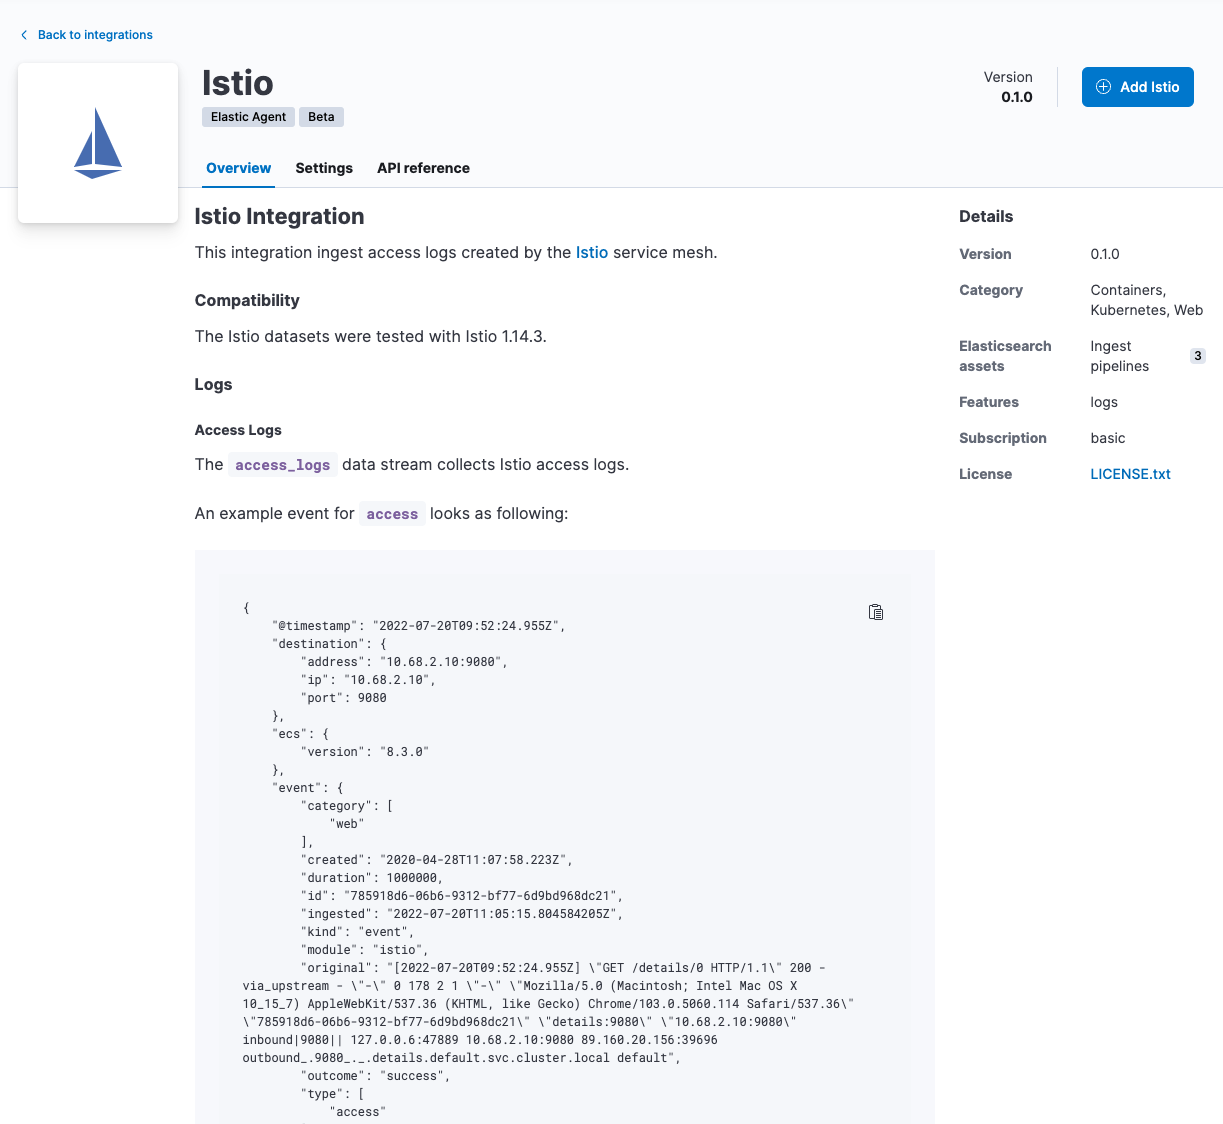 Add the Istio integration to collect logs from the Istio service mesh